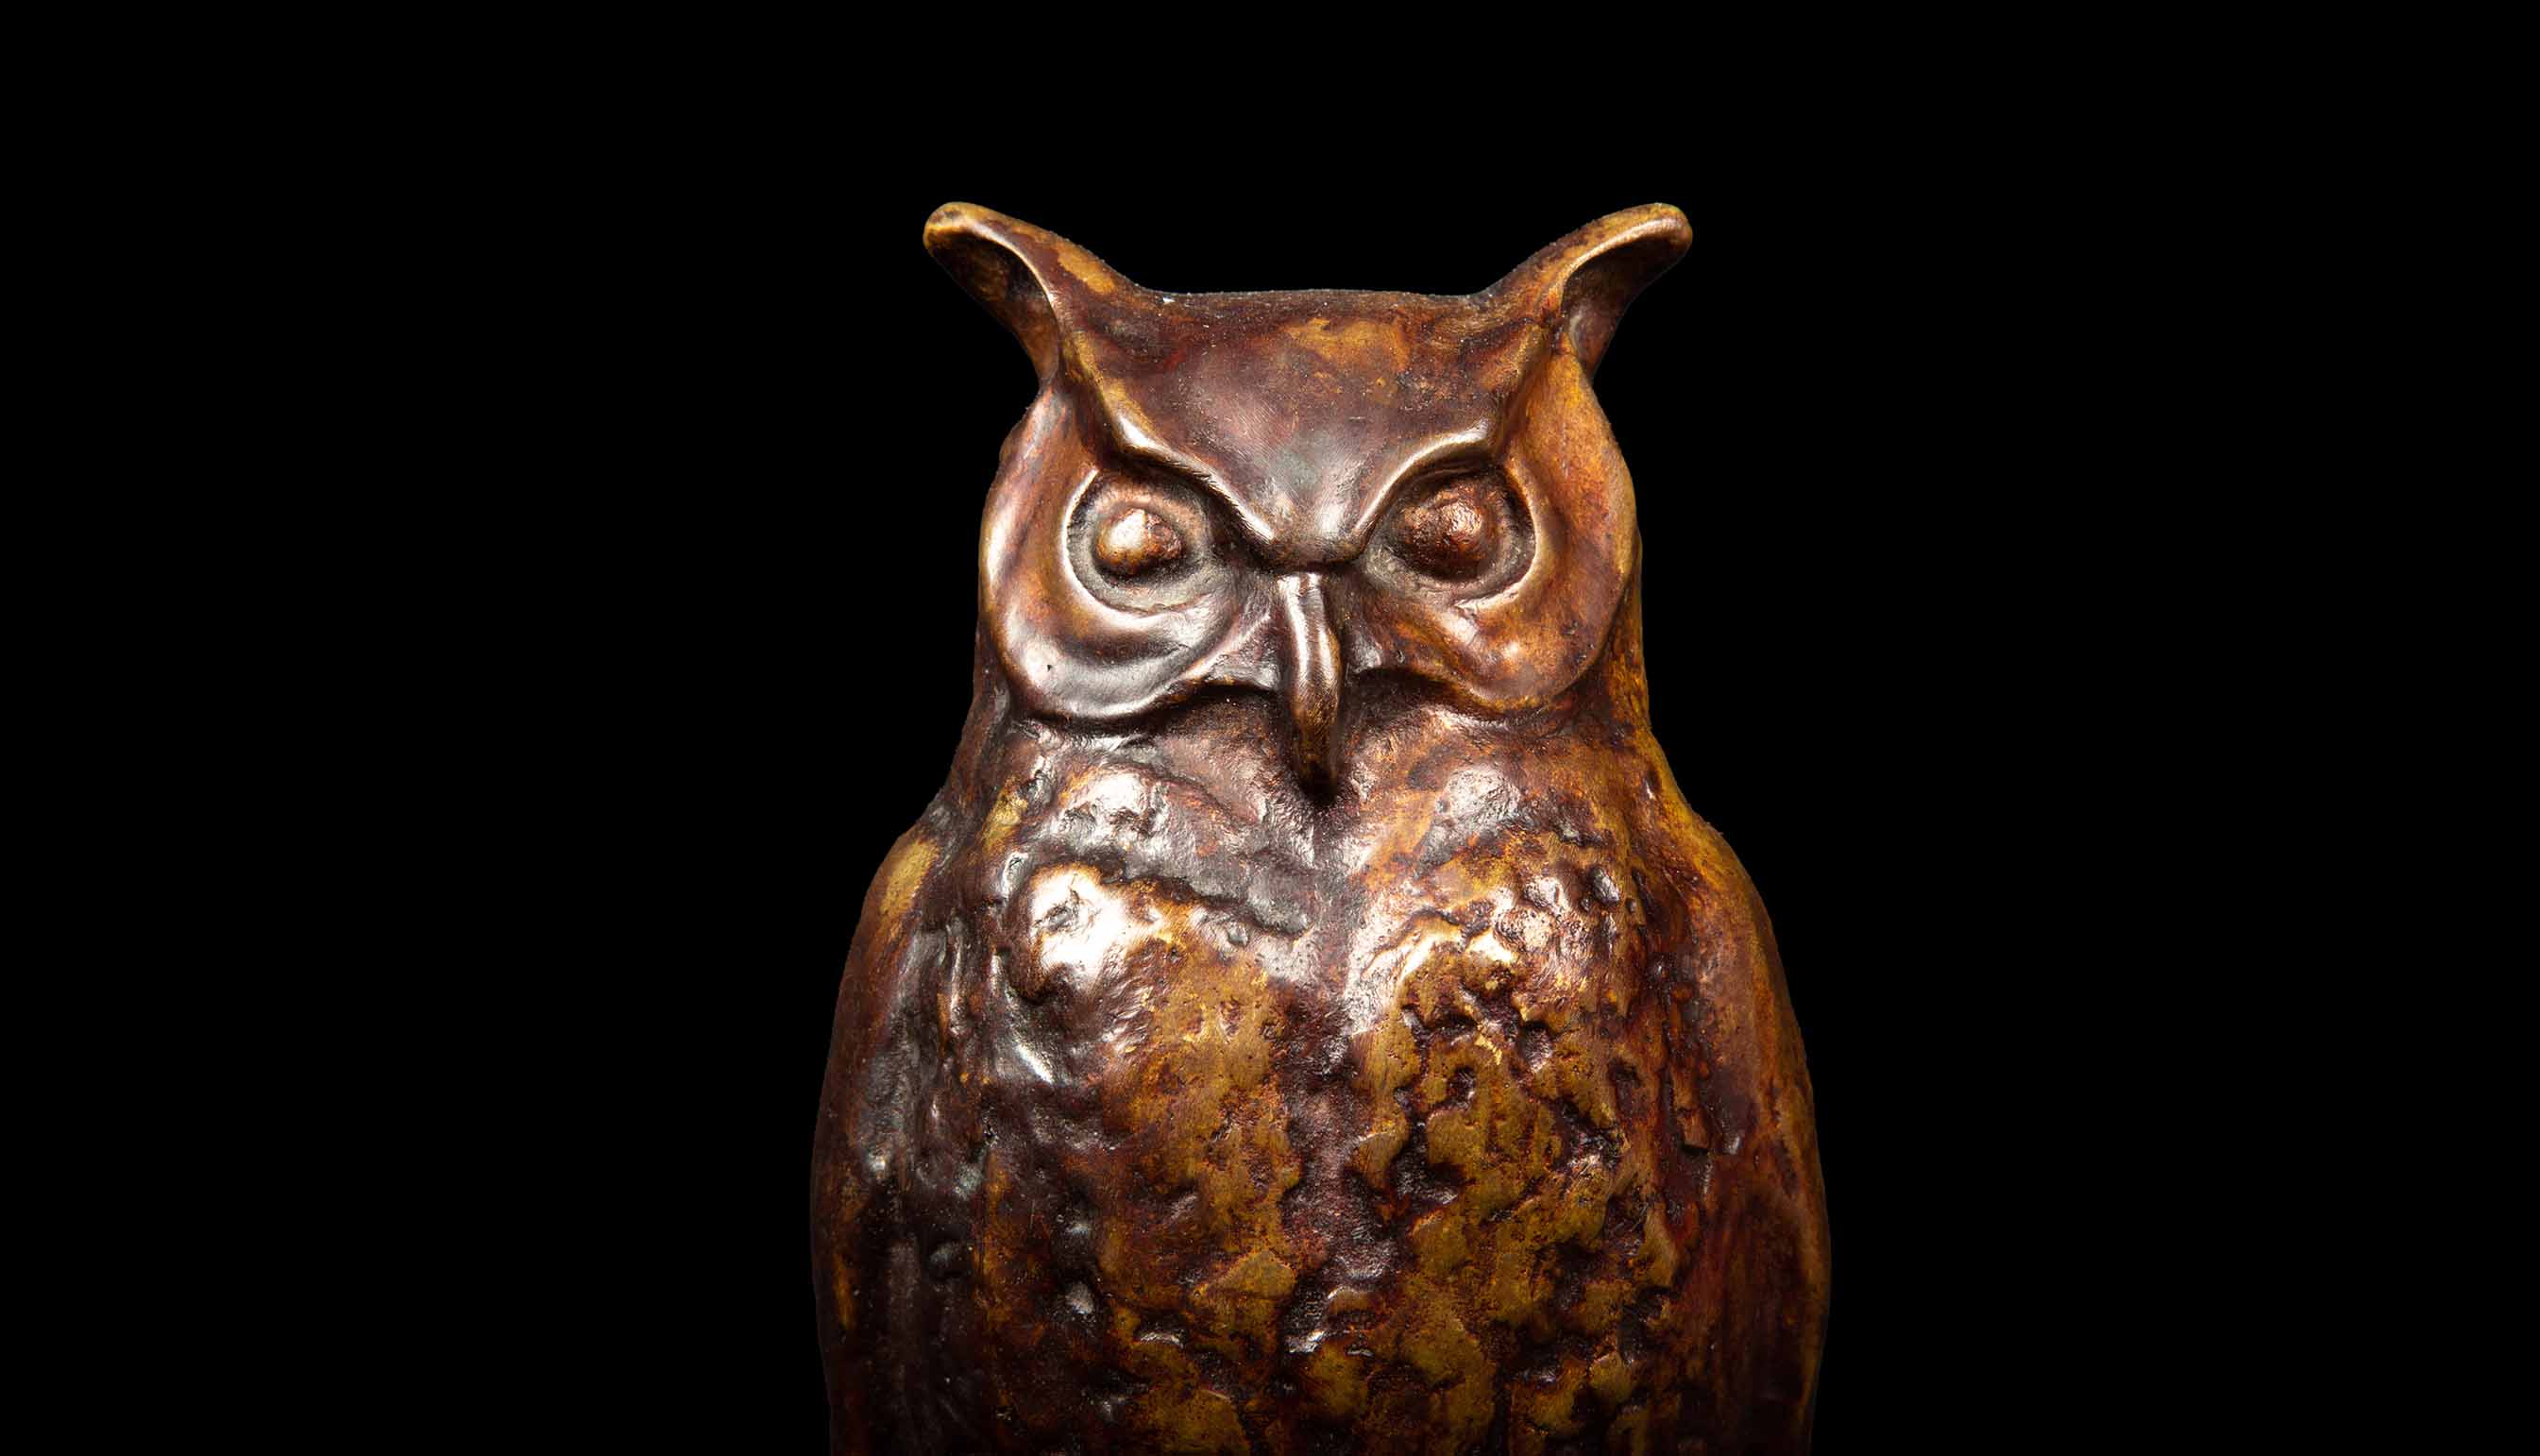 Bronze Owl on Green Marble Base by Max Le Verrier (1891 - 1973)